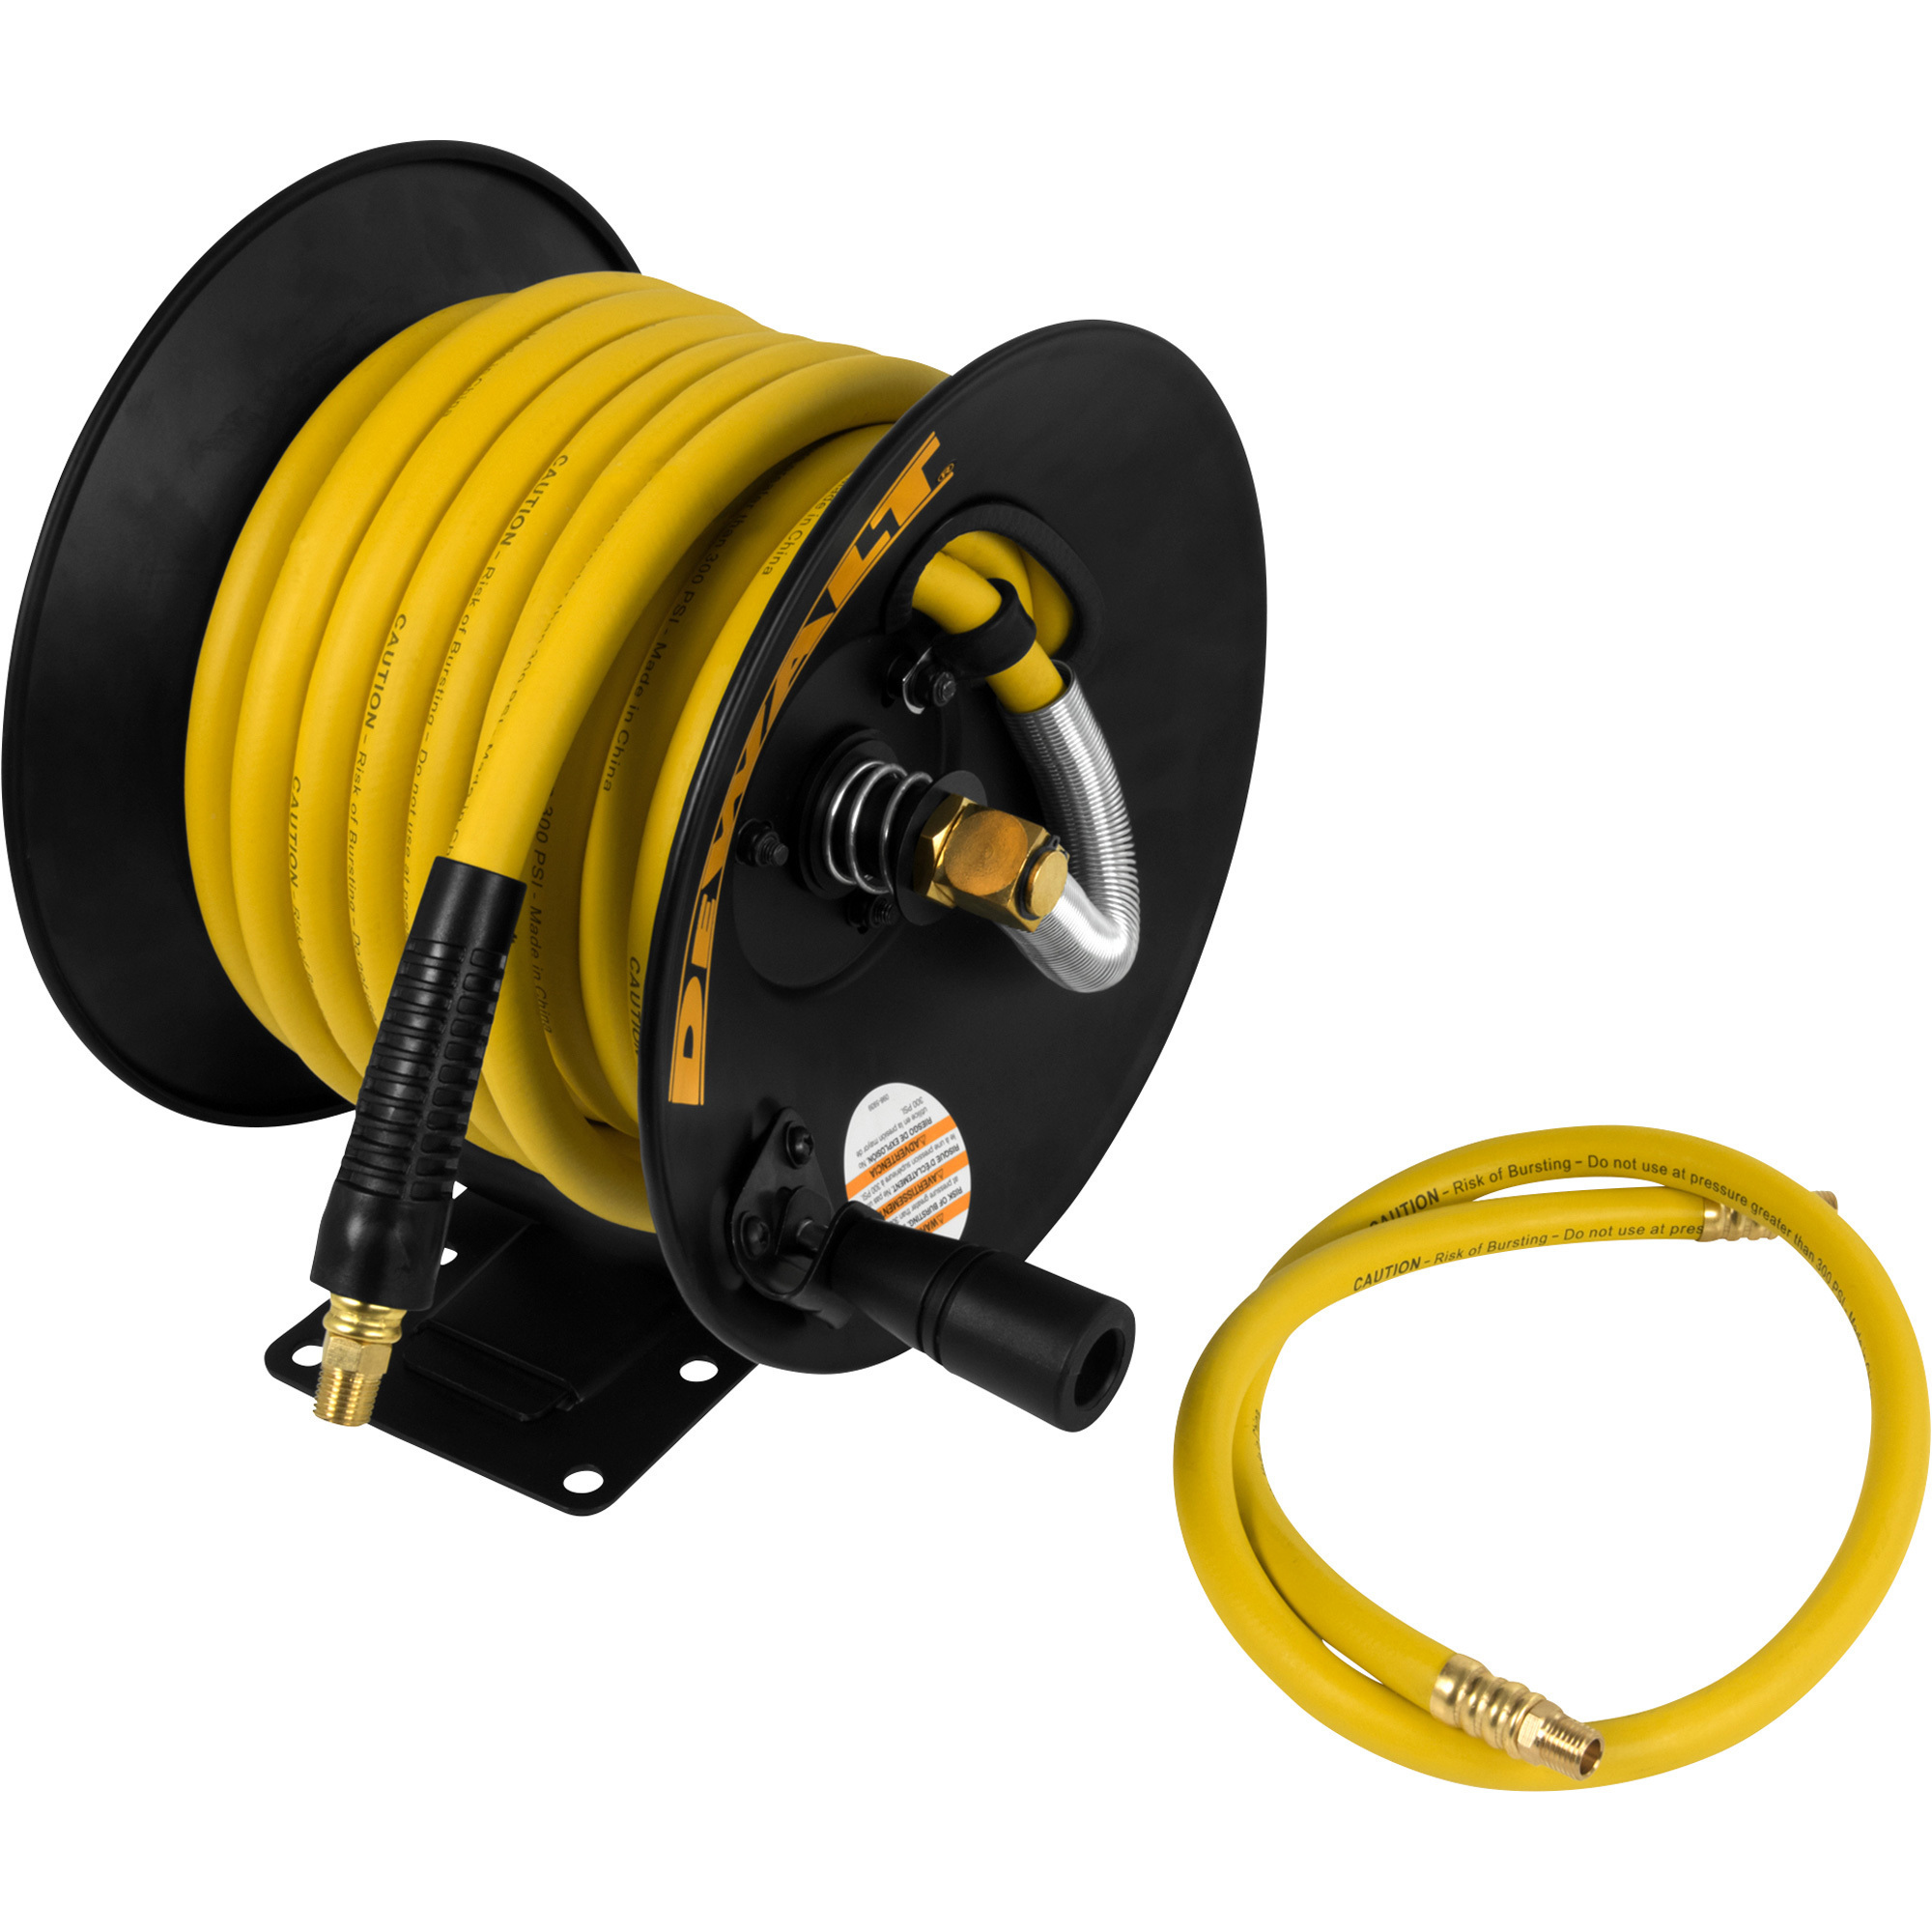 DEWALT Manual Hose Reel with 3/8in. x 50in. Hose and 3/8in. x 3ft. Lead-In  Hose, Max. 300 PSI, Model# DXCM024-0348